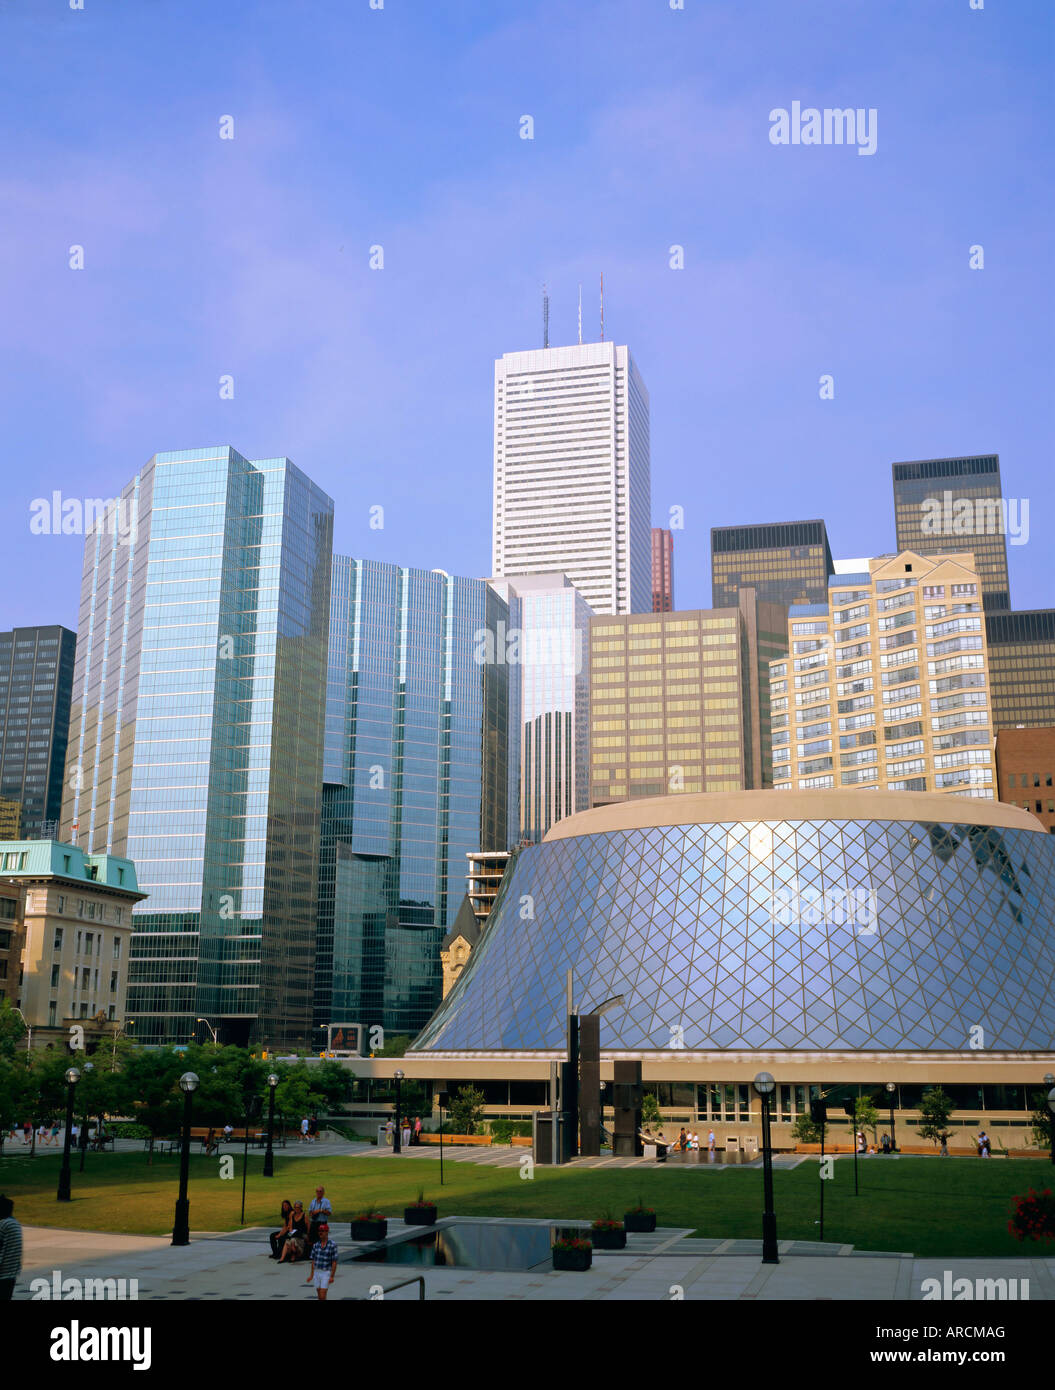 Roy Thompson Hall (Theatre) in the foreground, in the business centre of Toronto, Ontario, Canada Stock Photo